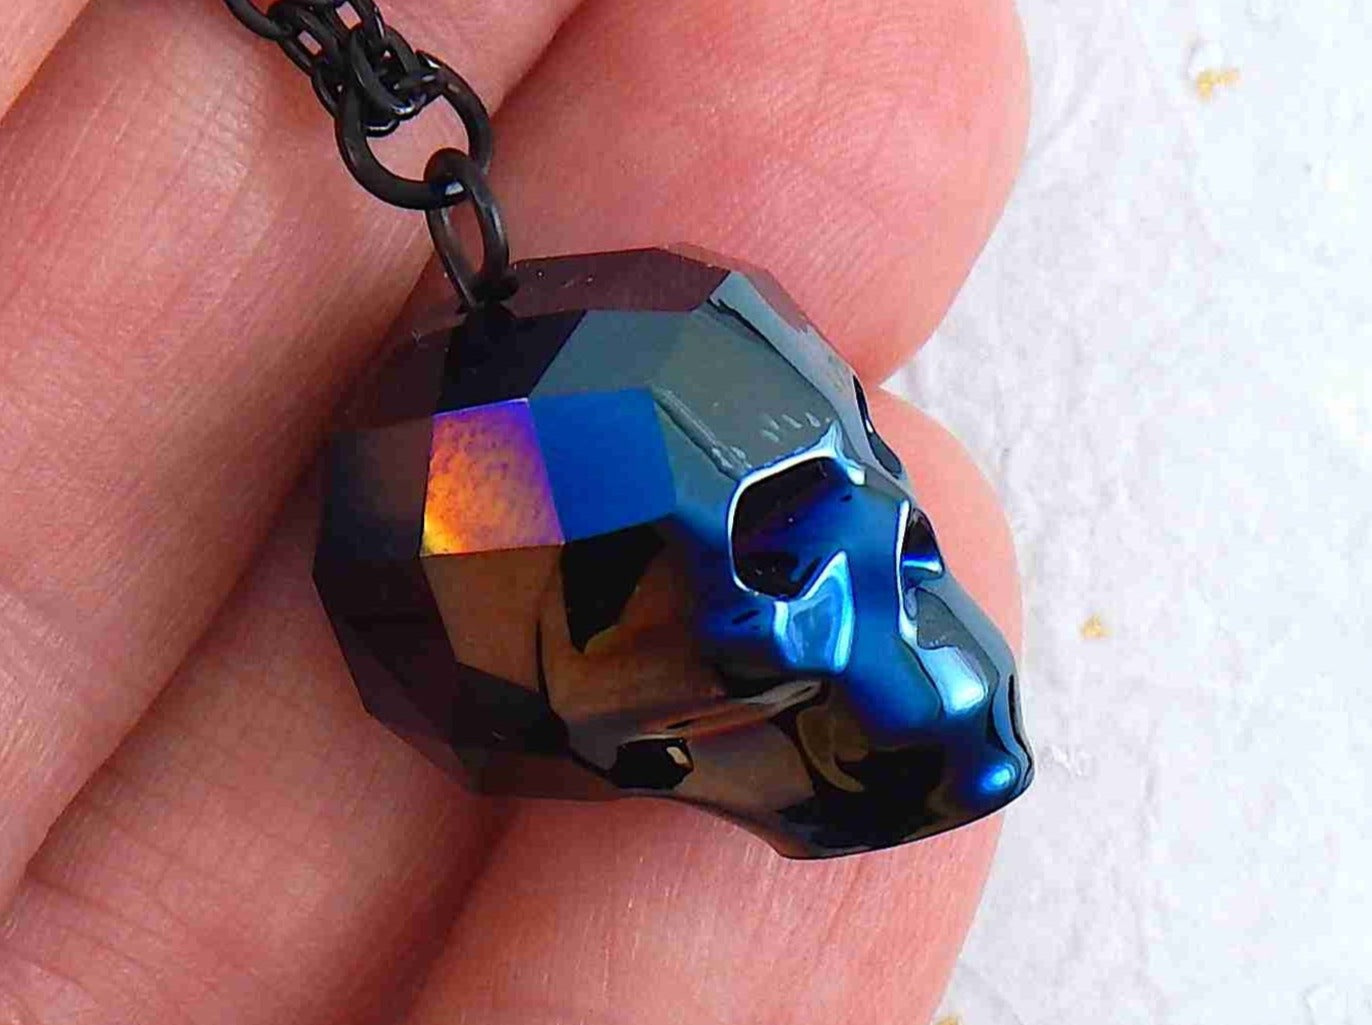 16-inch necklace with rare 20mm Swarovski faceted skull pendant in 3 colours (dark blue, dark gray, rose gold), matching stainless steel chain